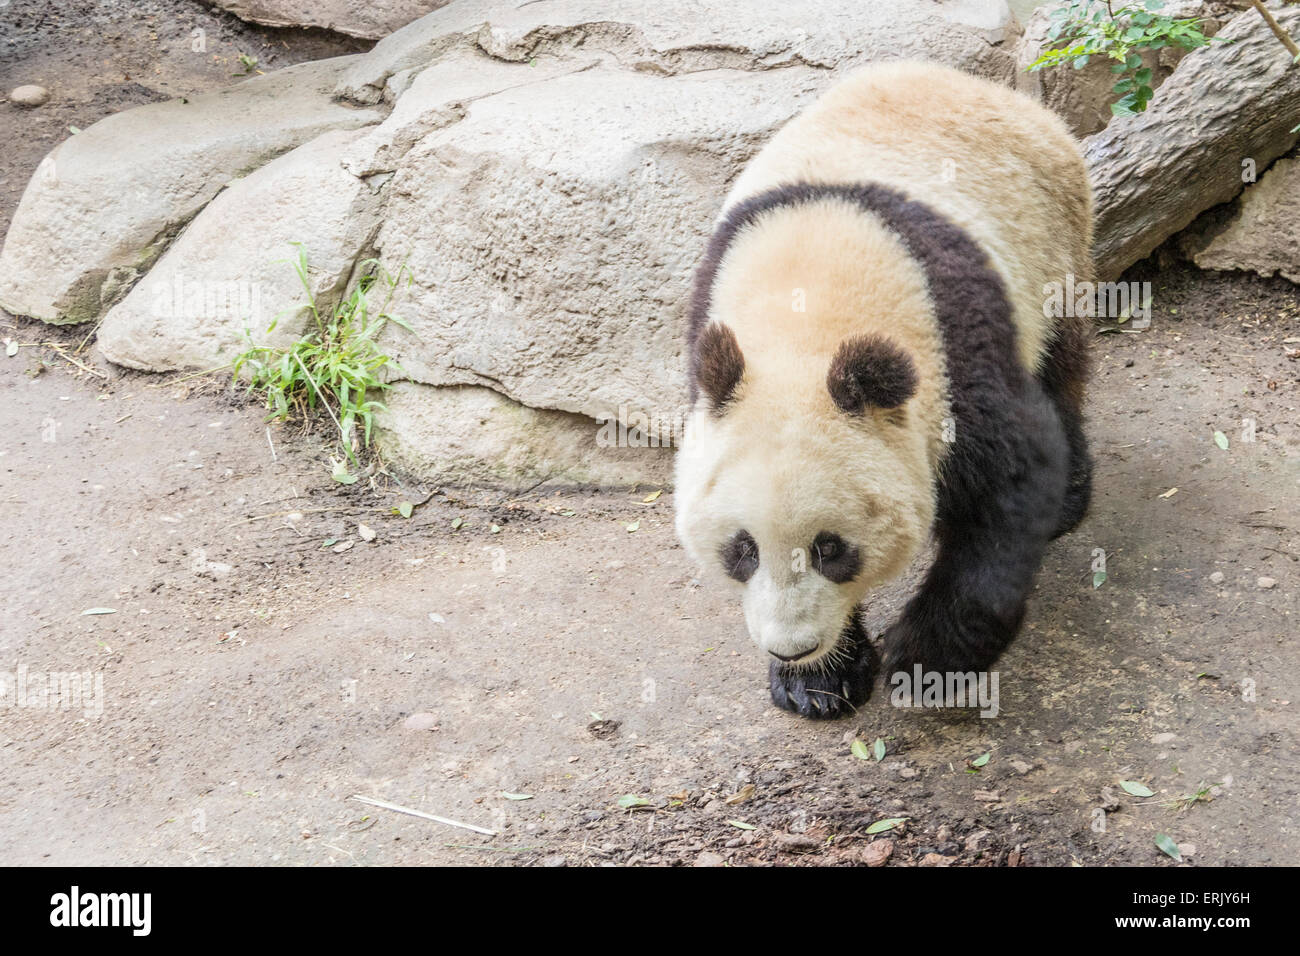 San diego zoo panda hi-res stock photography and images - Alamy